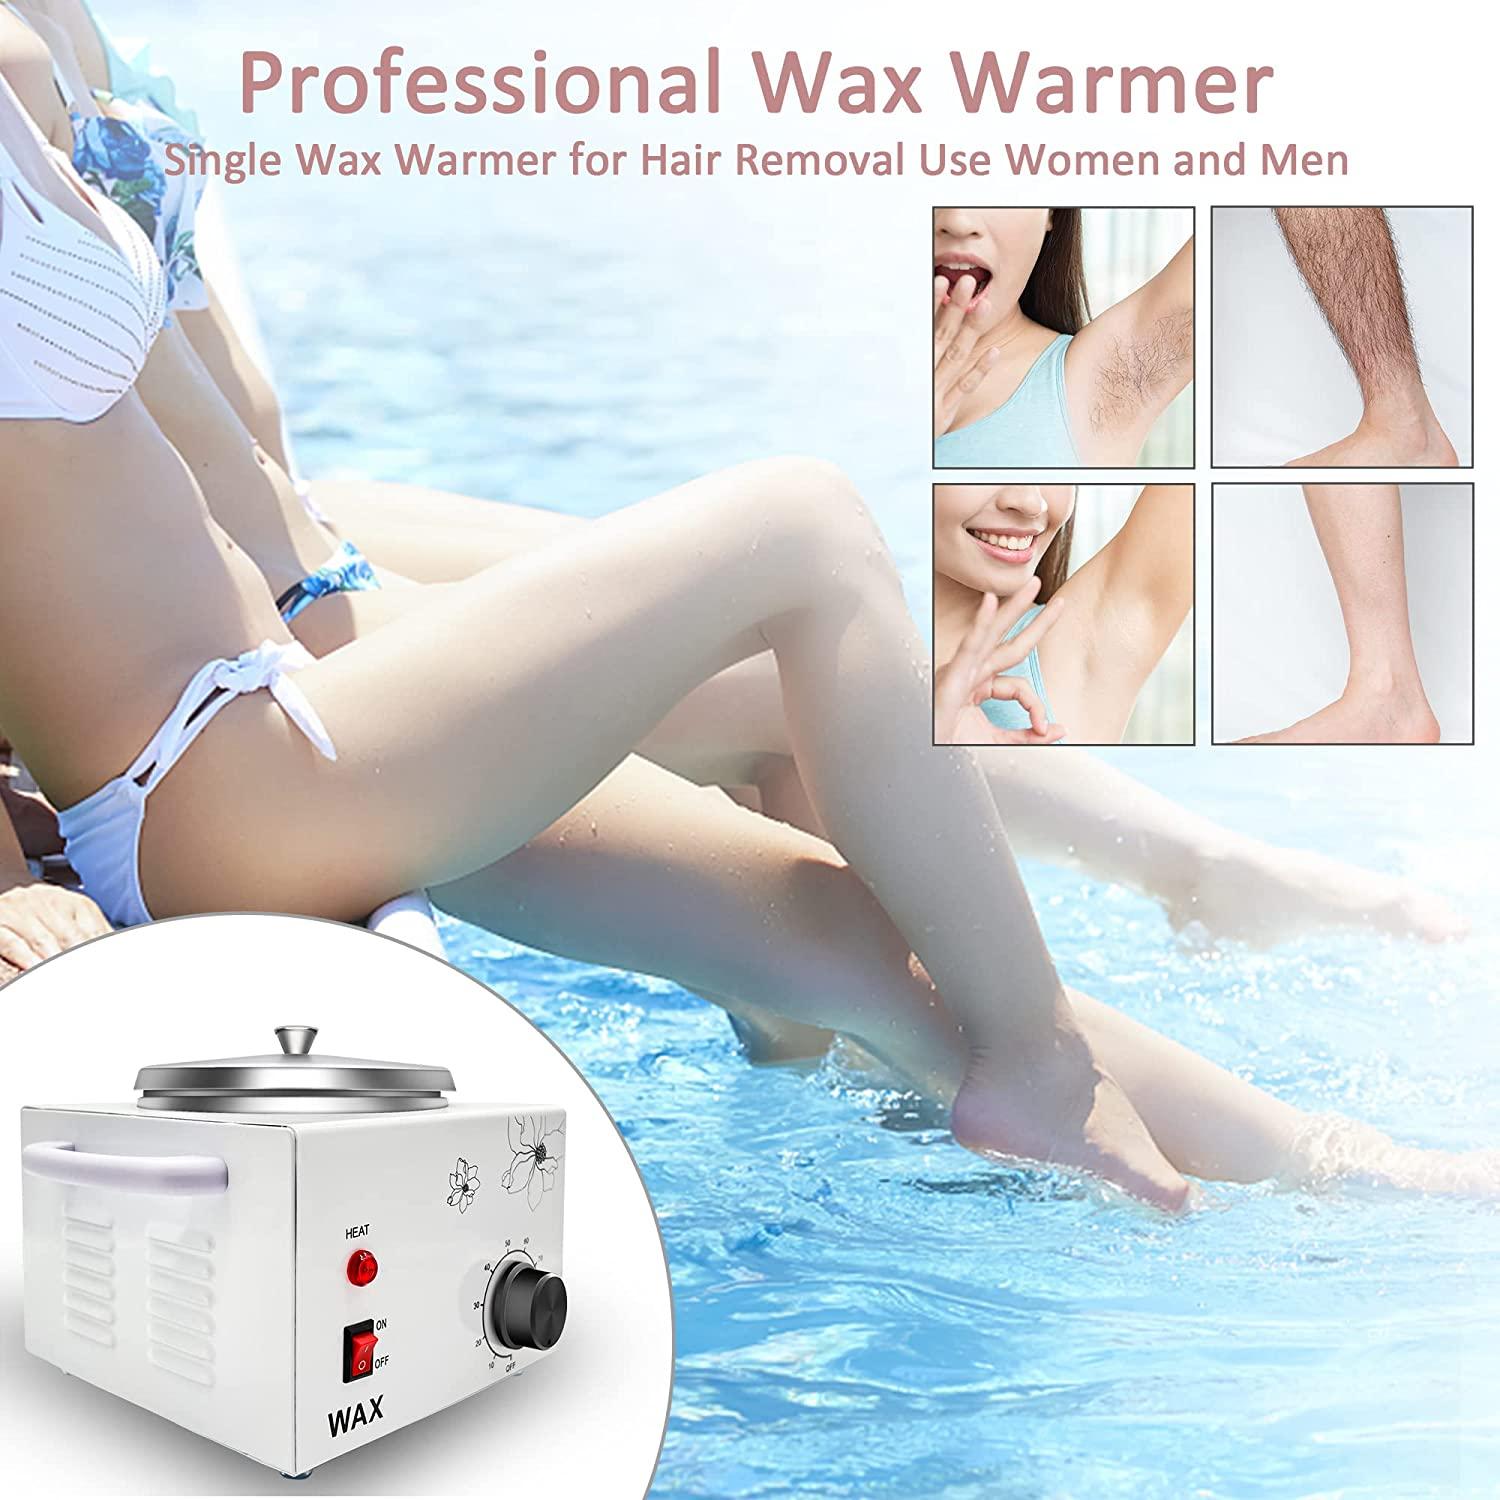  Single Wax Warmer Professional Electric Wax Heater for Hair  Removal- Wax Pot with 50pcs Wax Sticks Heat up Quickly & Fahrenheit Dial,  Paraffin Facial Skin Body SPA Salon Equipment 